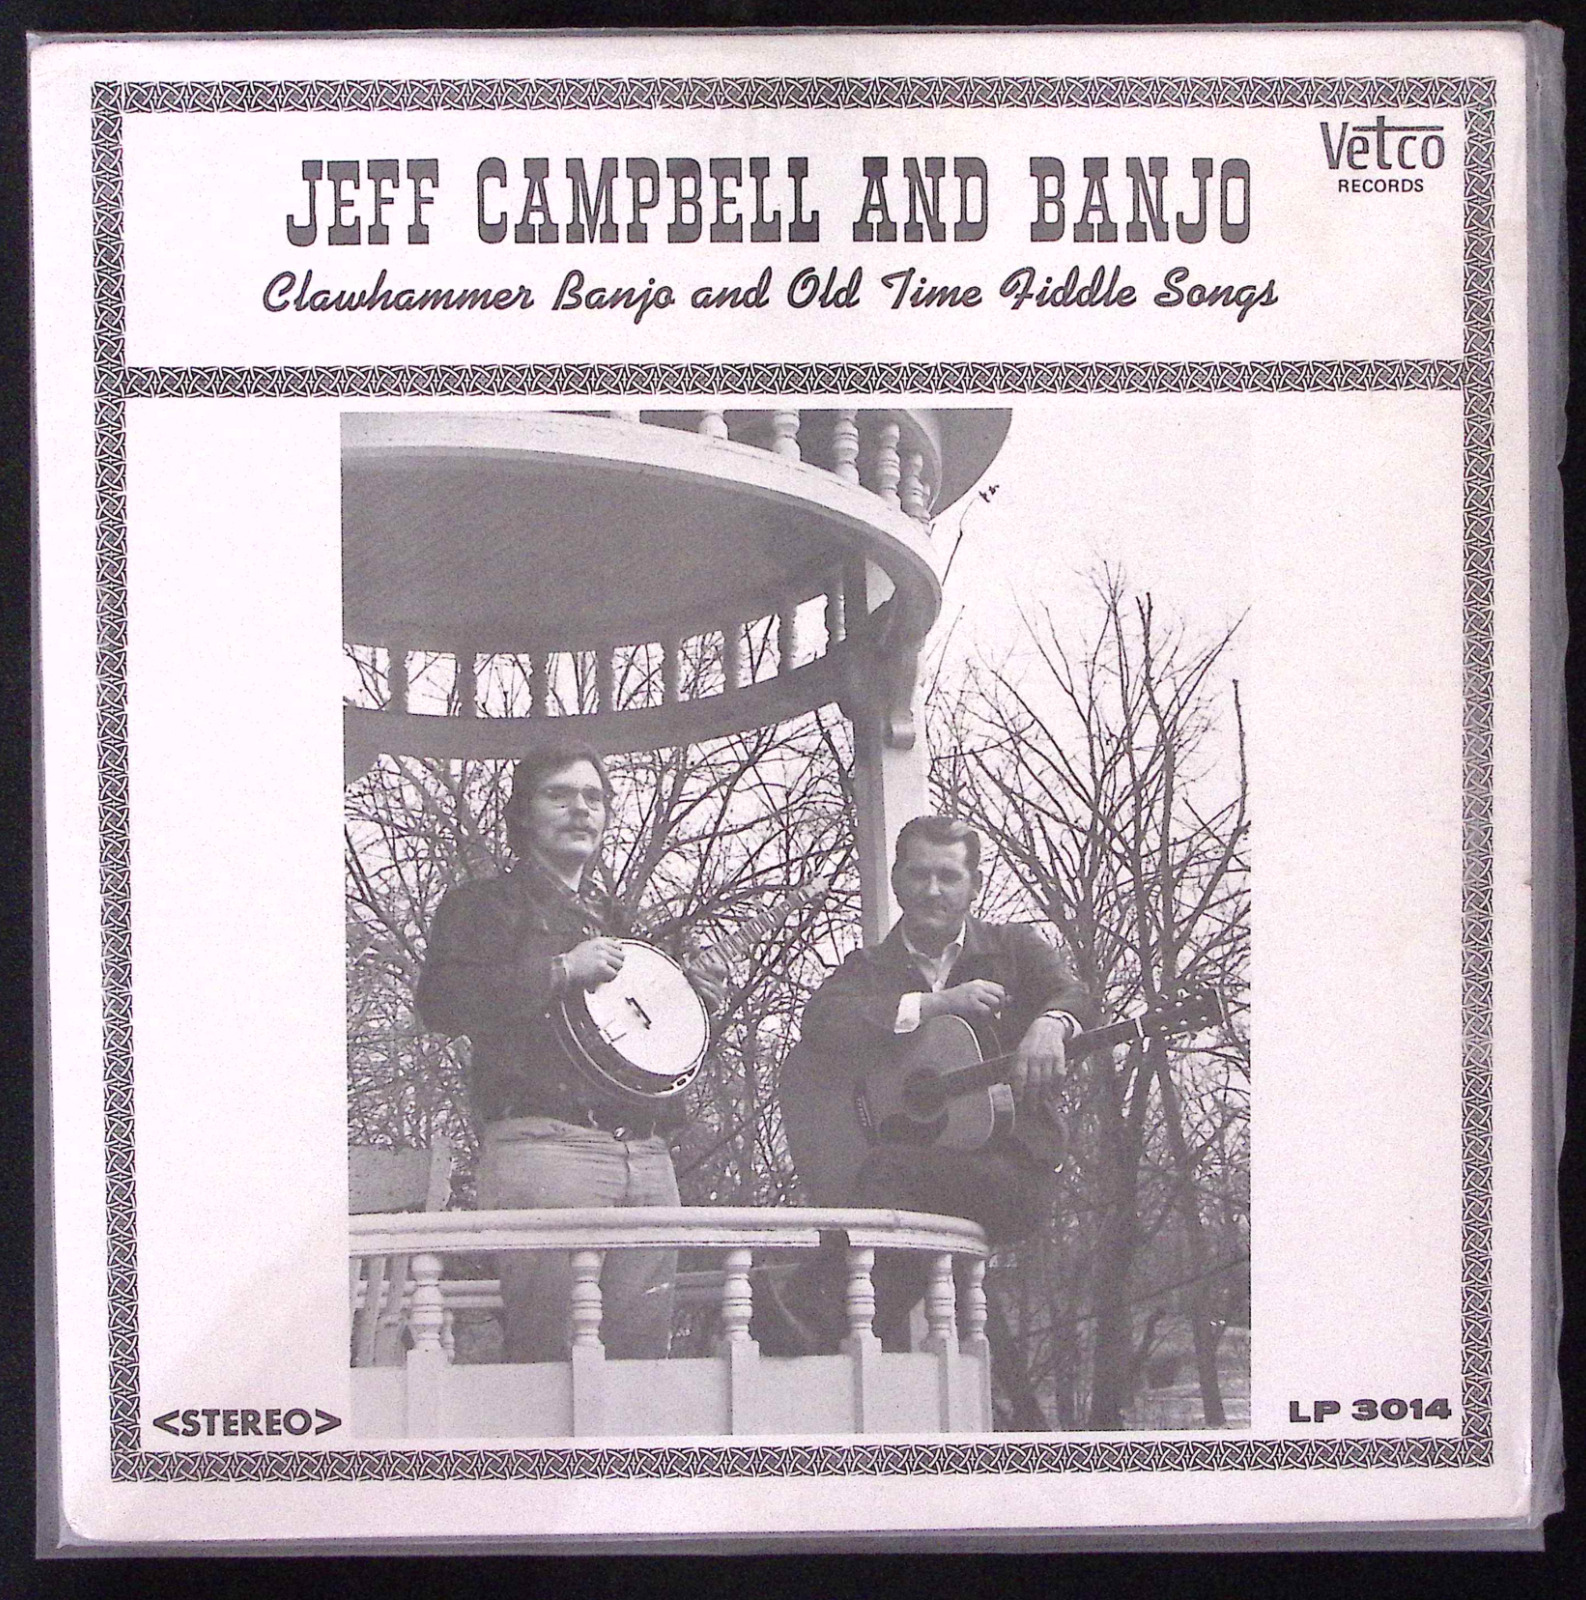 JEFF CAMPBELL AND BANJO CLAWHAMMER BANJO OLD TIME FIDDLE SONGS  VINYL LP 139-27W